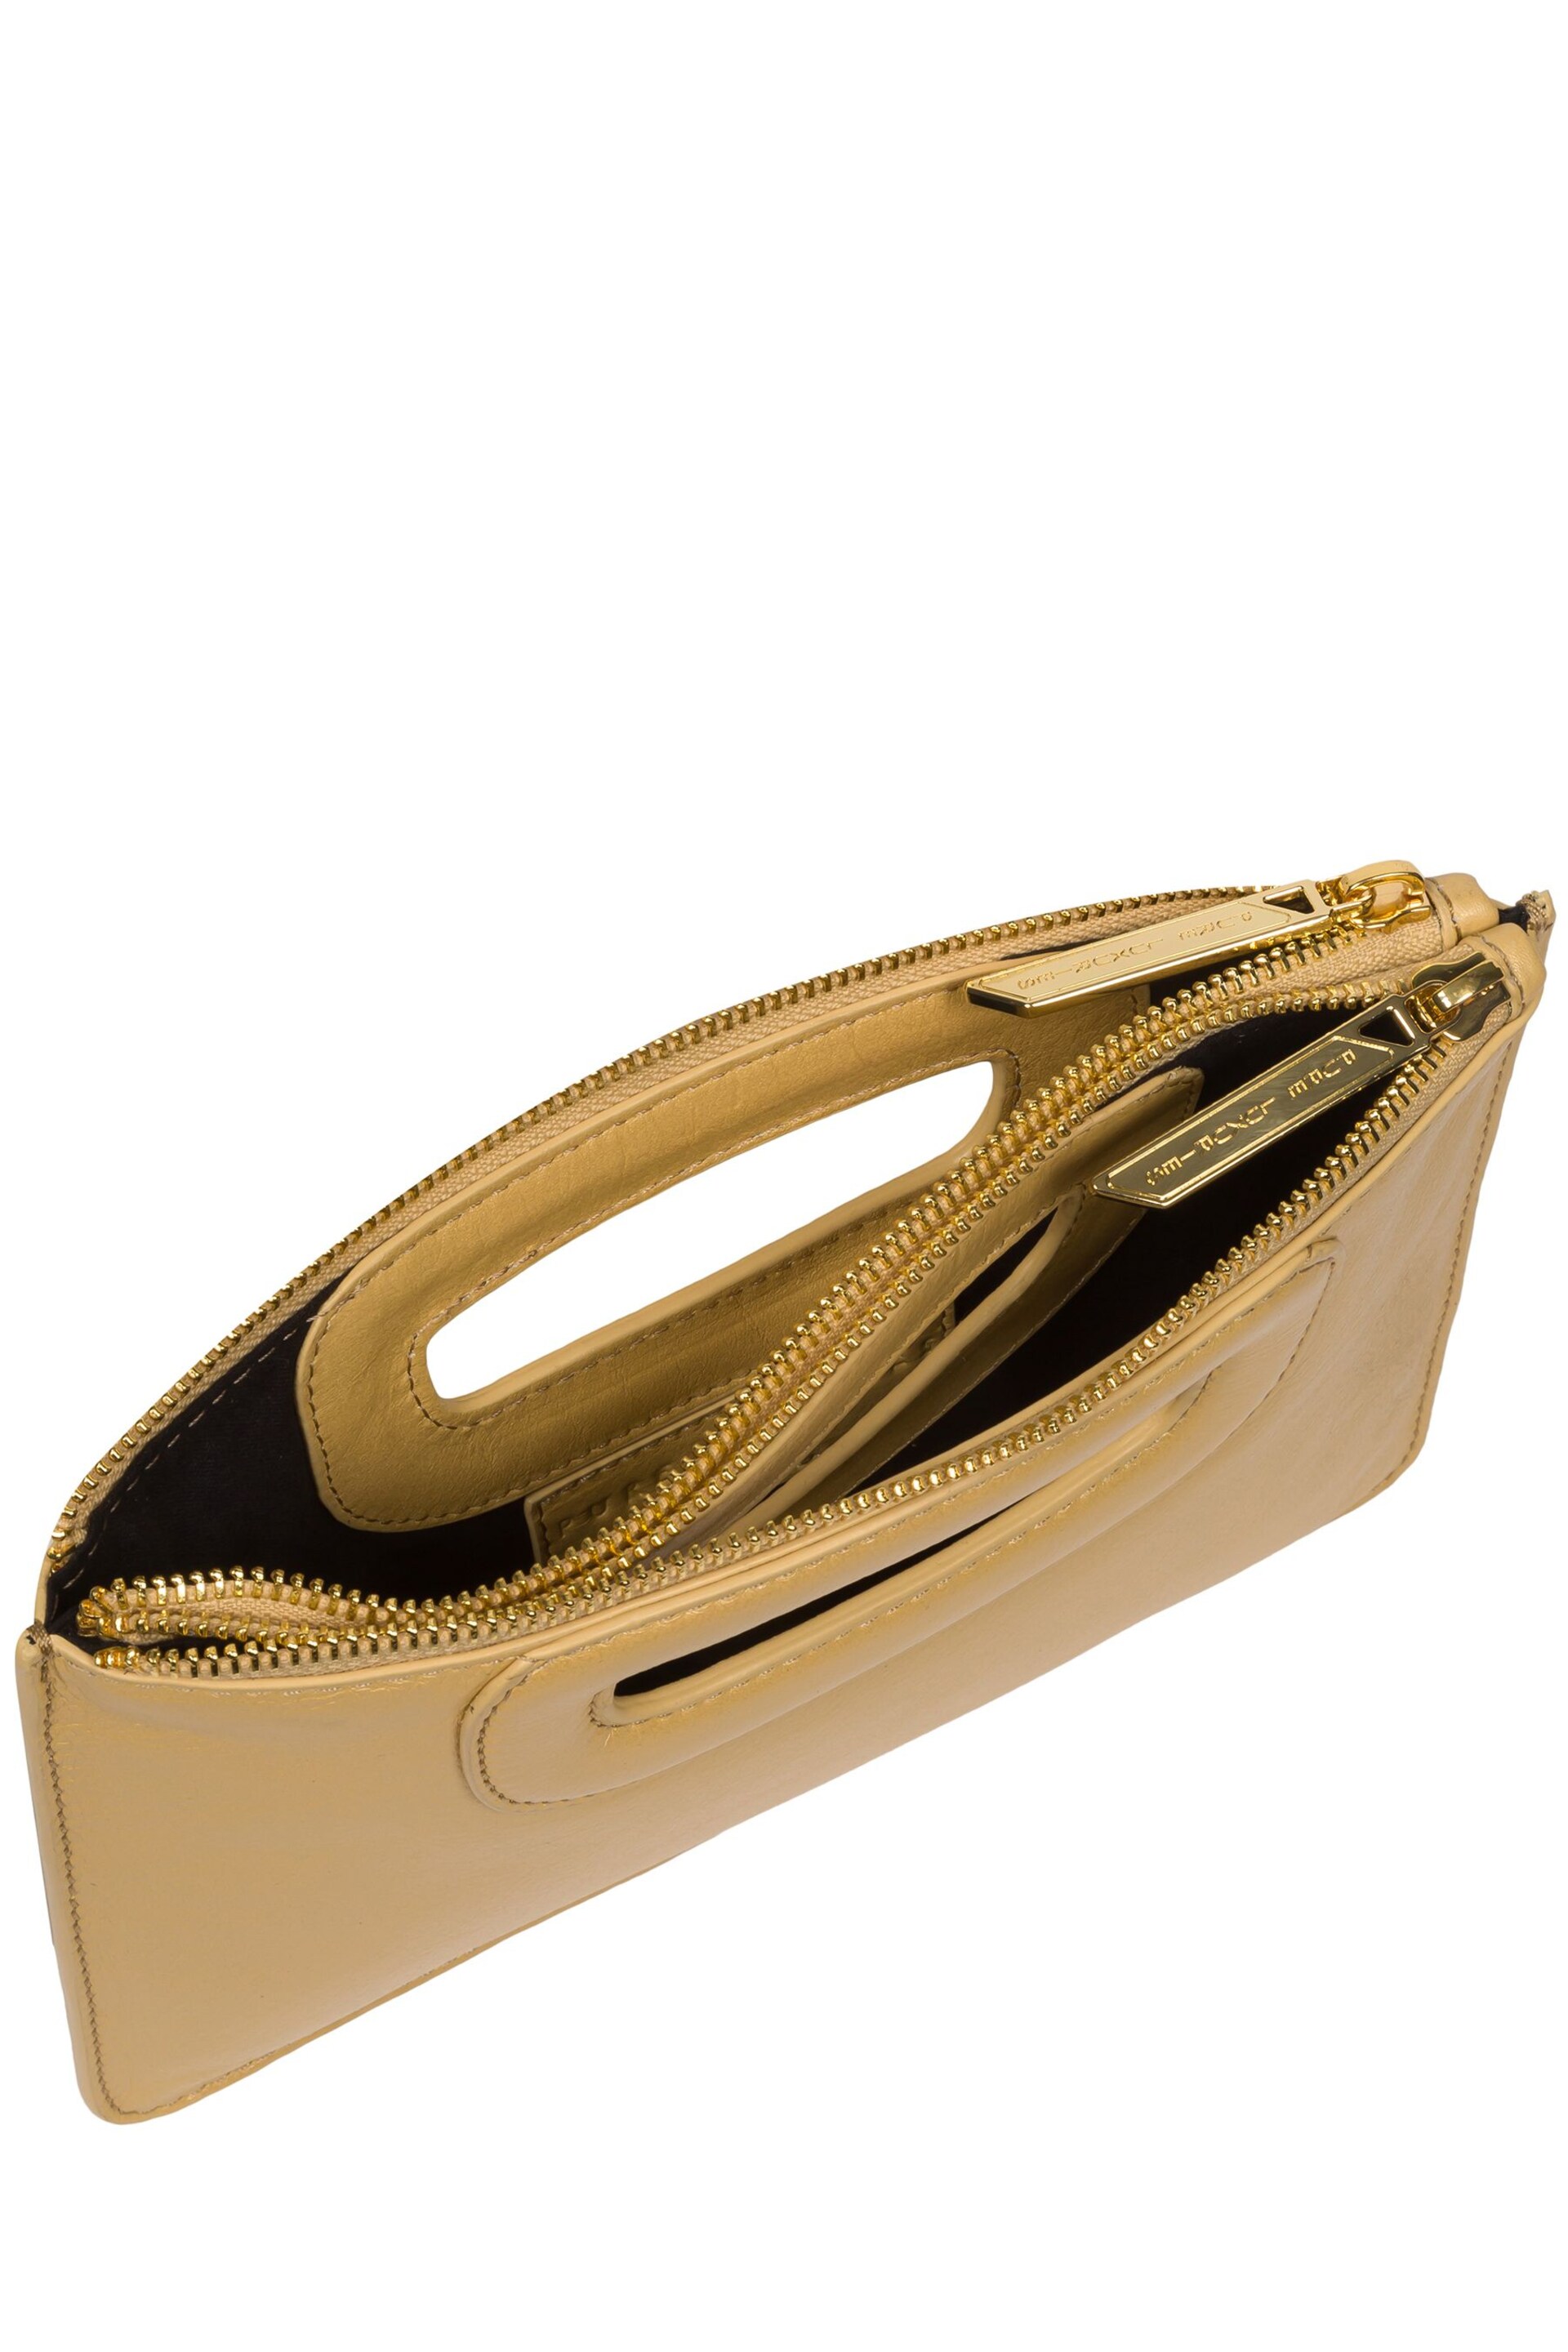 Pure Luxuries London Esher Leather Clutch Bag - Image 6 of 6